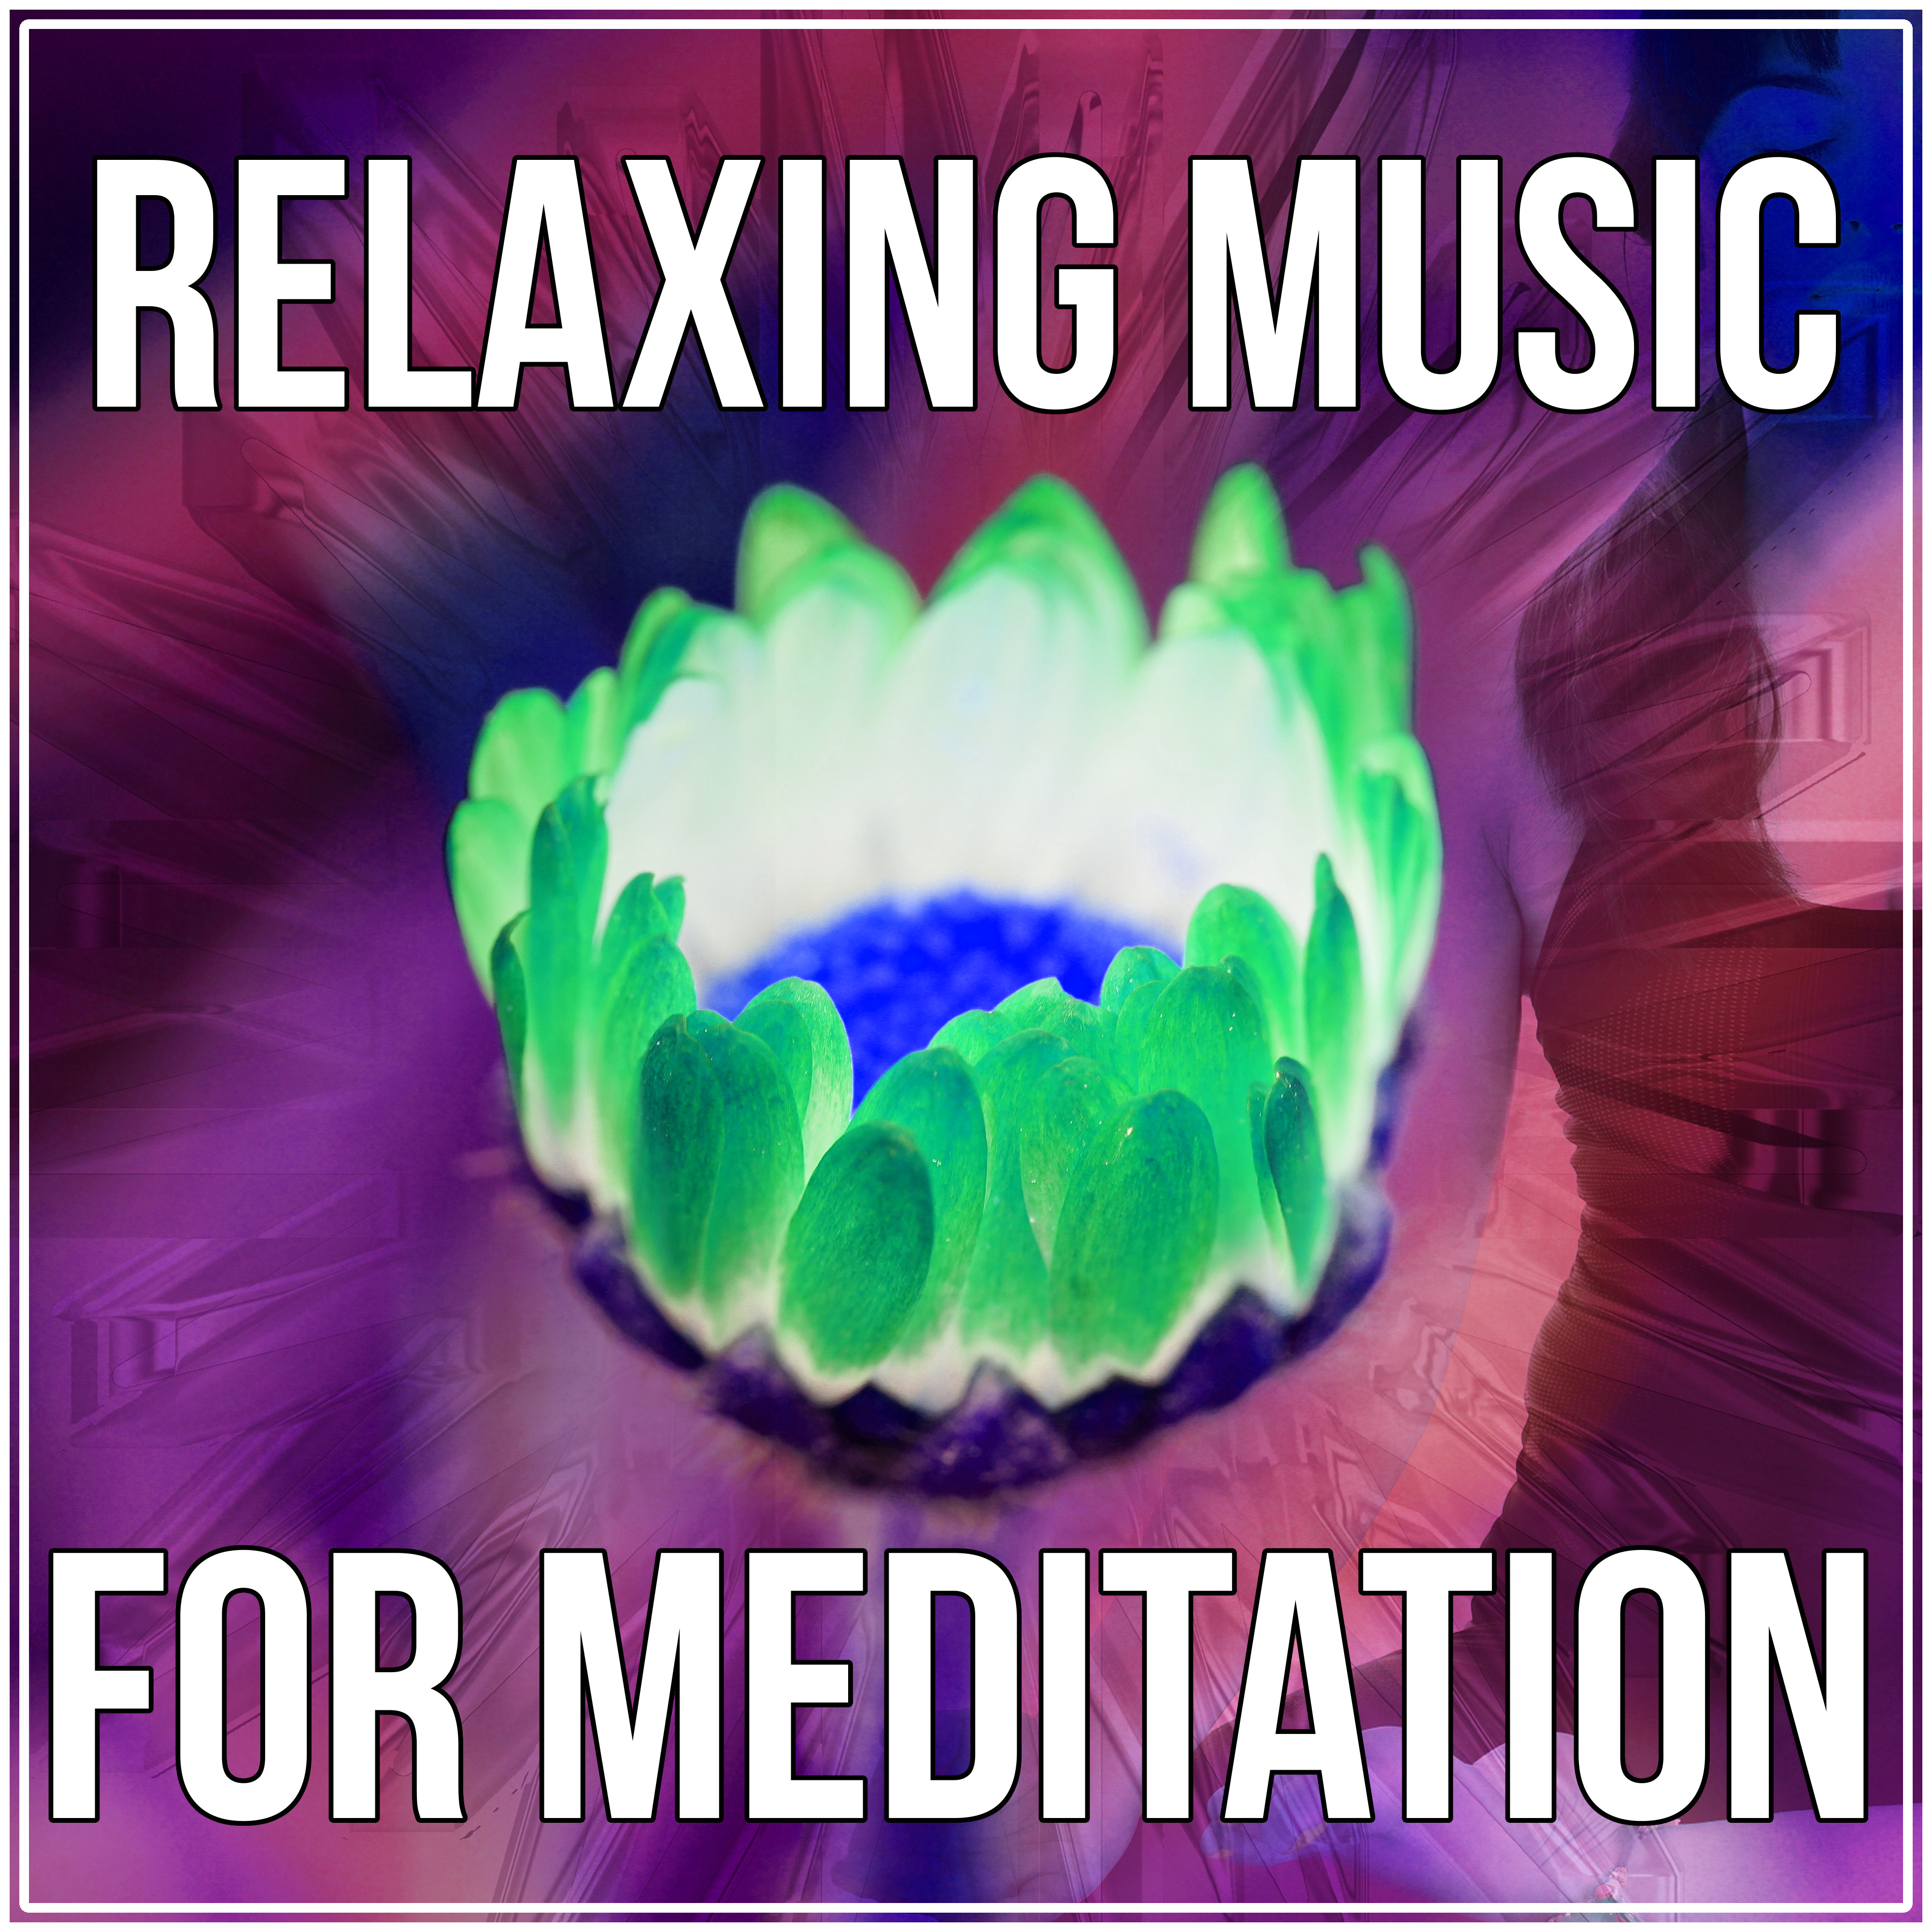 Relaxing Music for Meditation - Ocean Sounds for Yoga Class & Mindfulness Meditation, Relax in Free Time, Zen, Reiki, Sleep